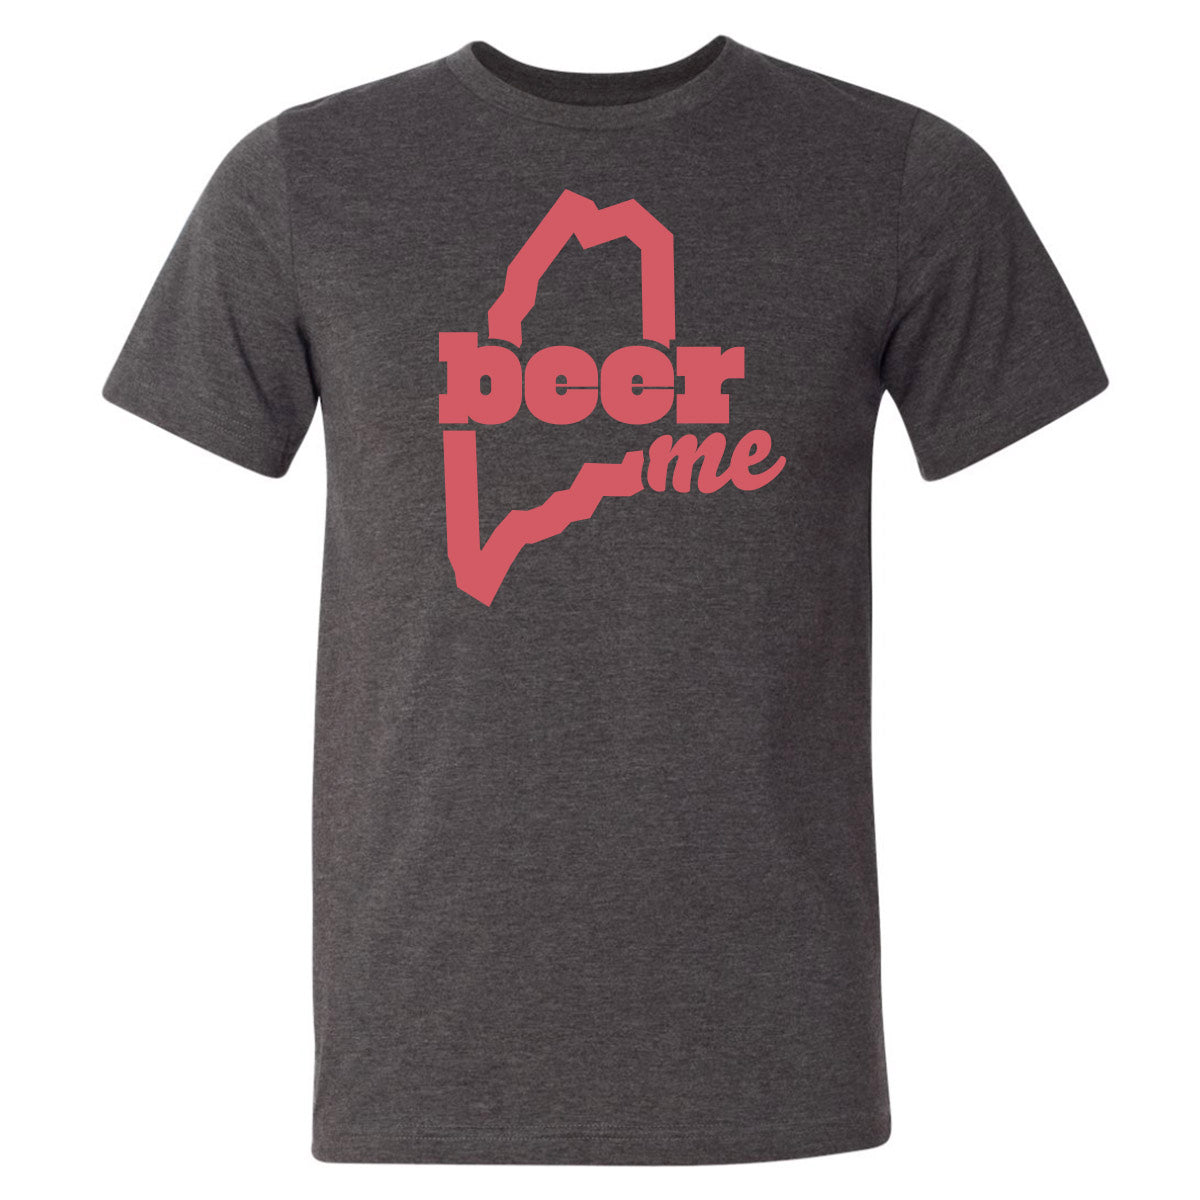 BeerME T-shirt - Heather Charcoal/Red